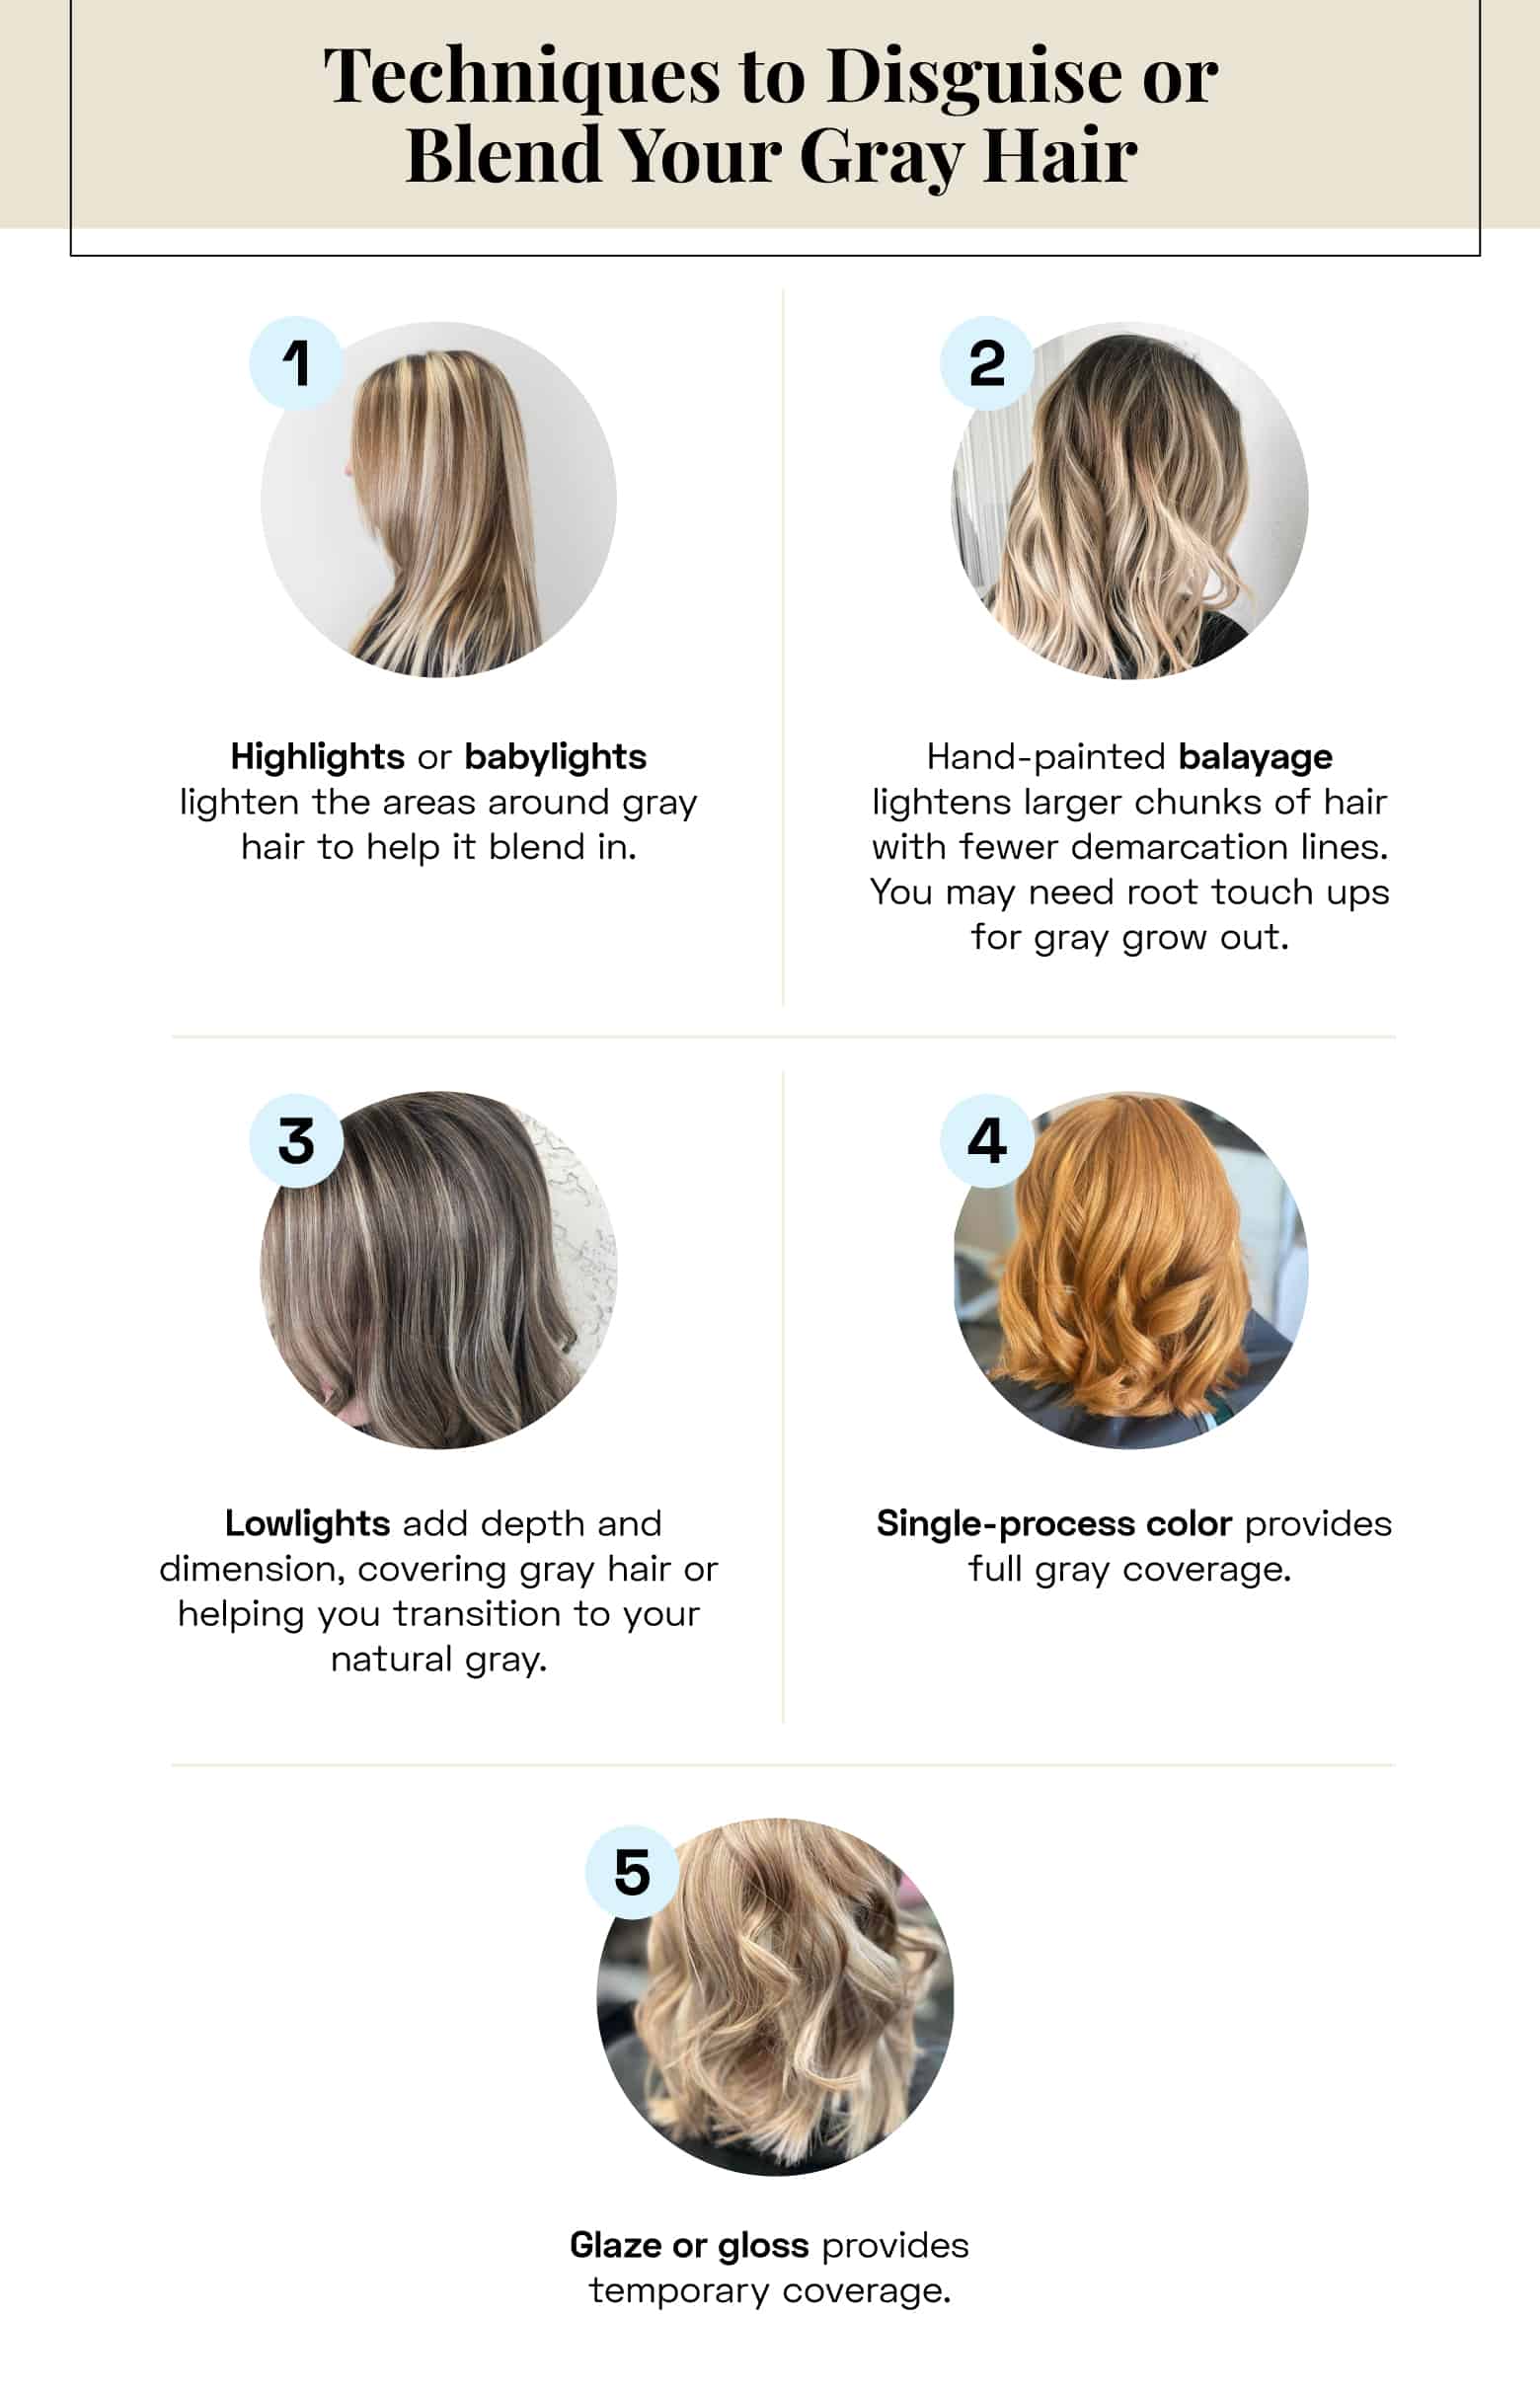 techniques to disguise or blend gray hair